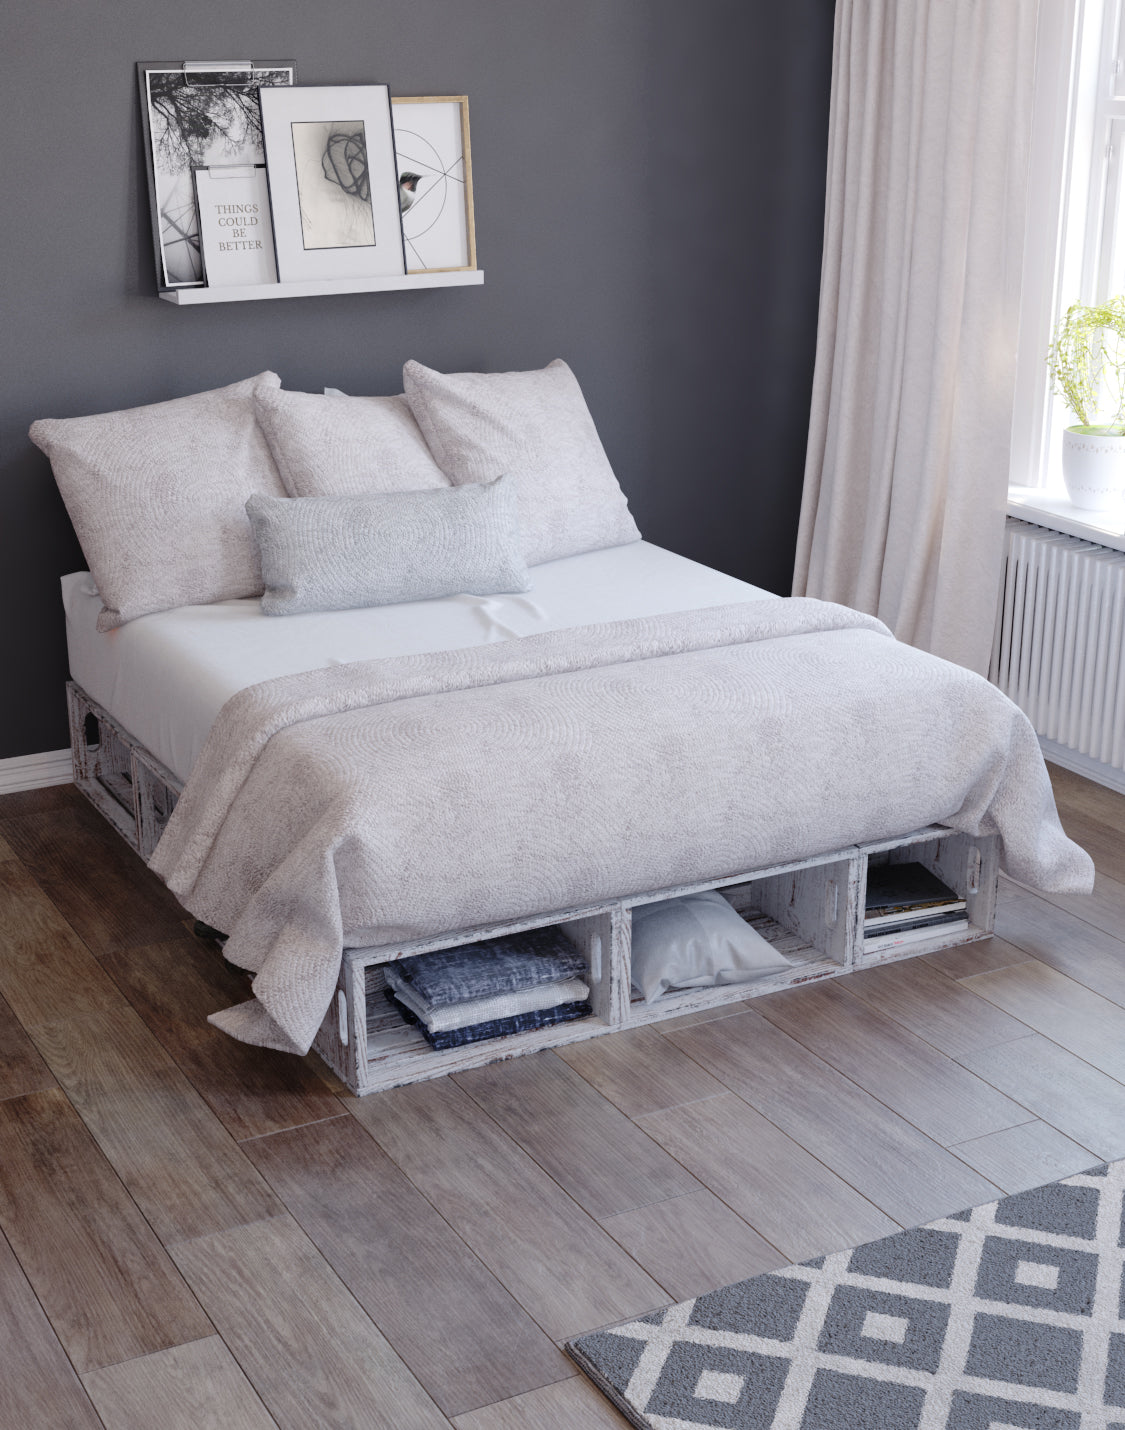 ANDRE Bed Modular And real wood furniture product